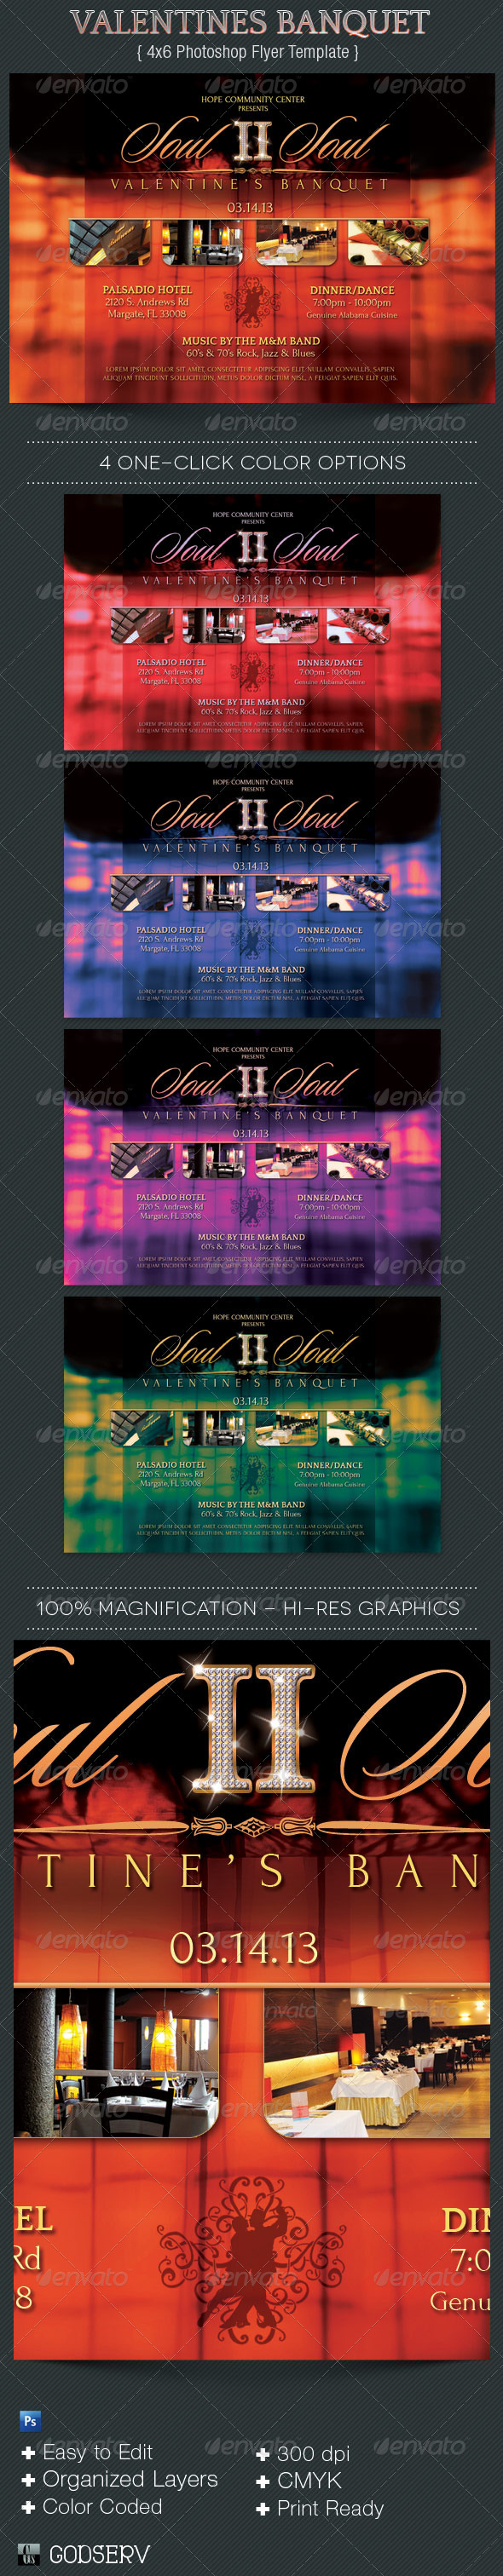 Valntines-Banquet-Flyer-Template-Preview